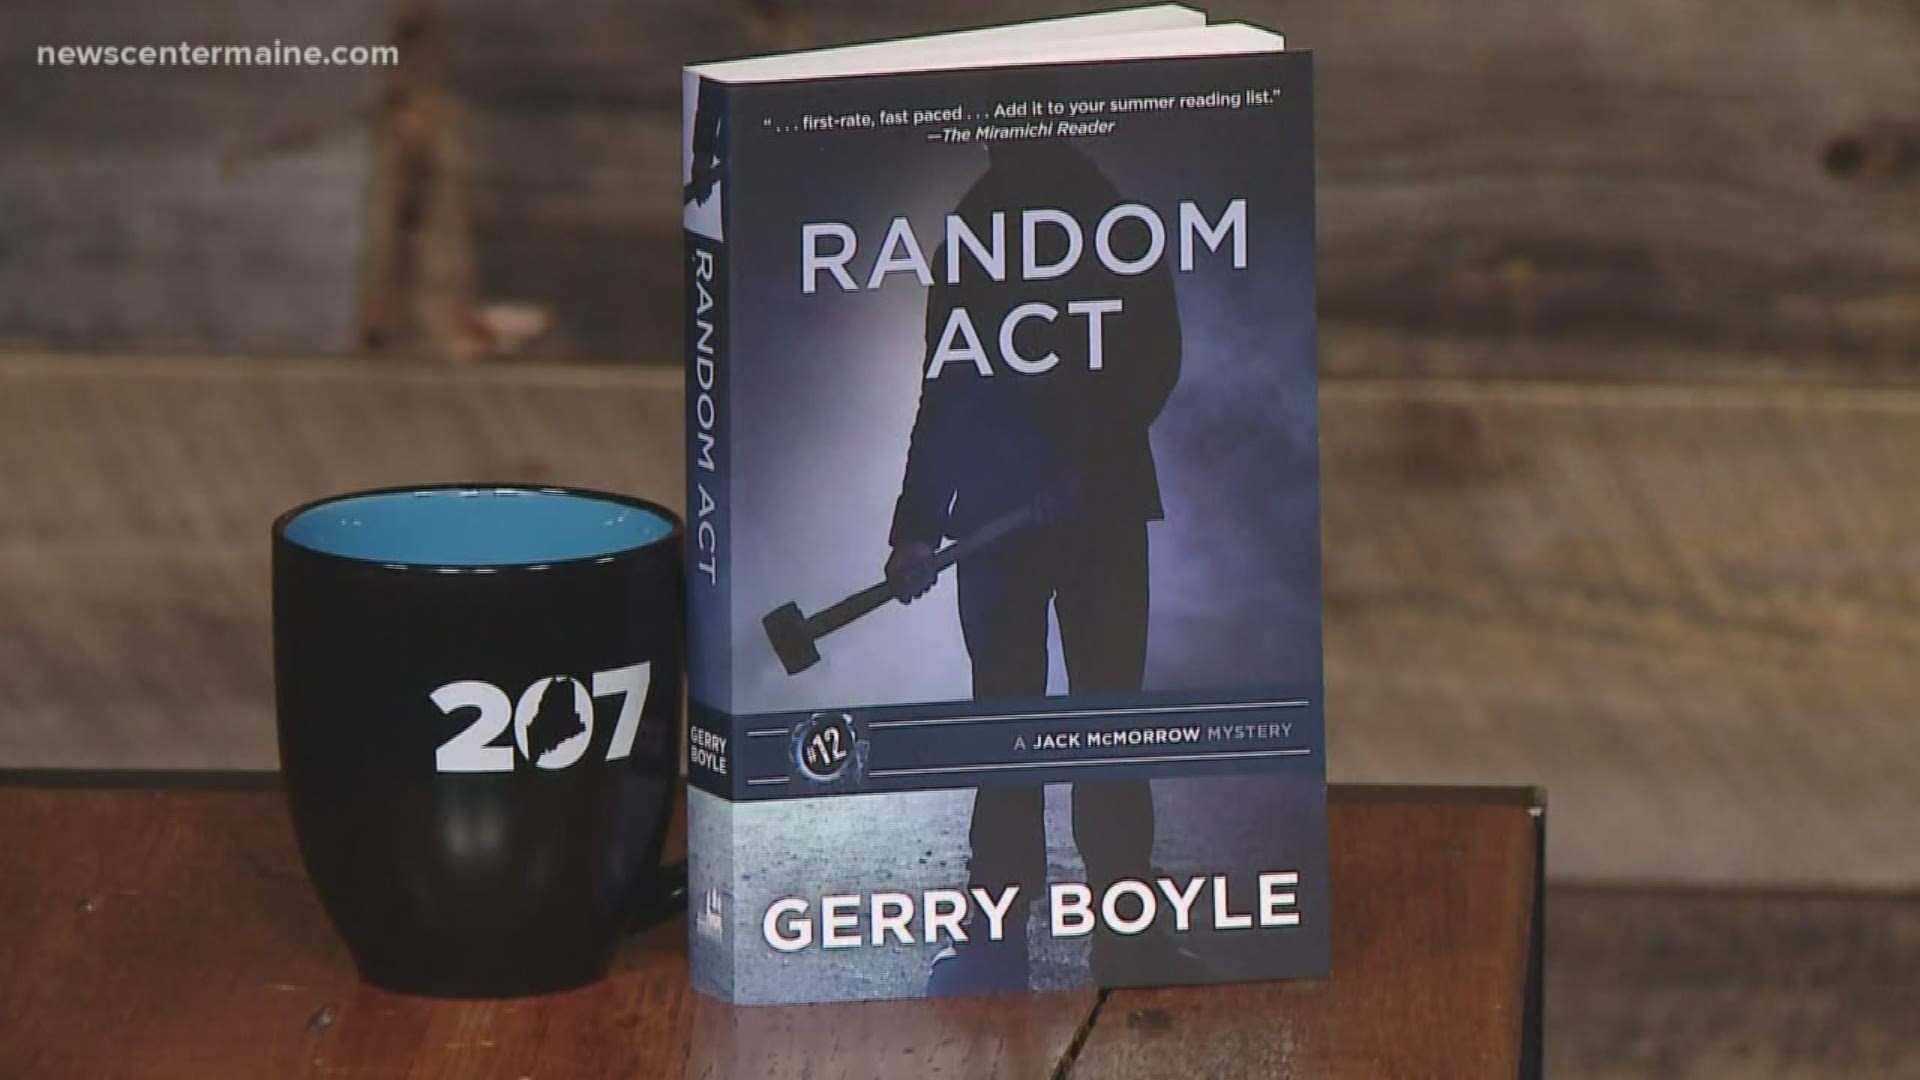 Gerry Boyle explains his new book, set in a familiar setting.